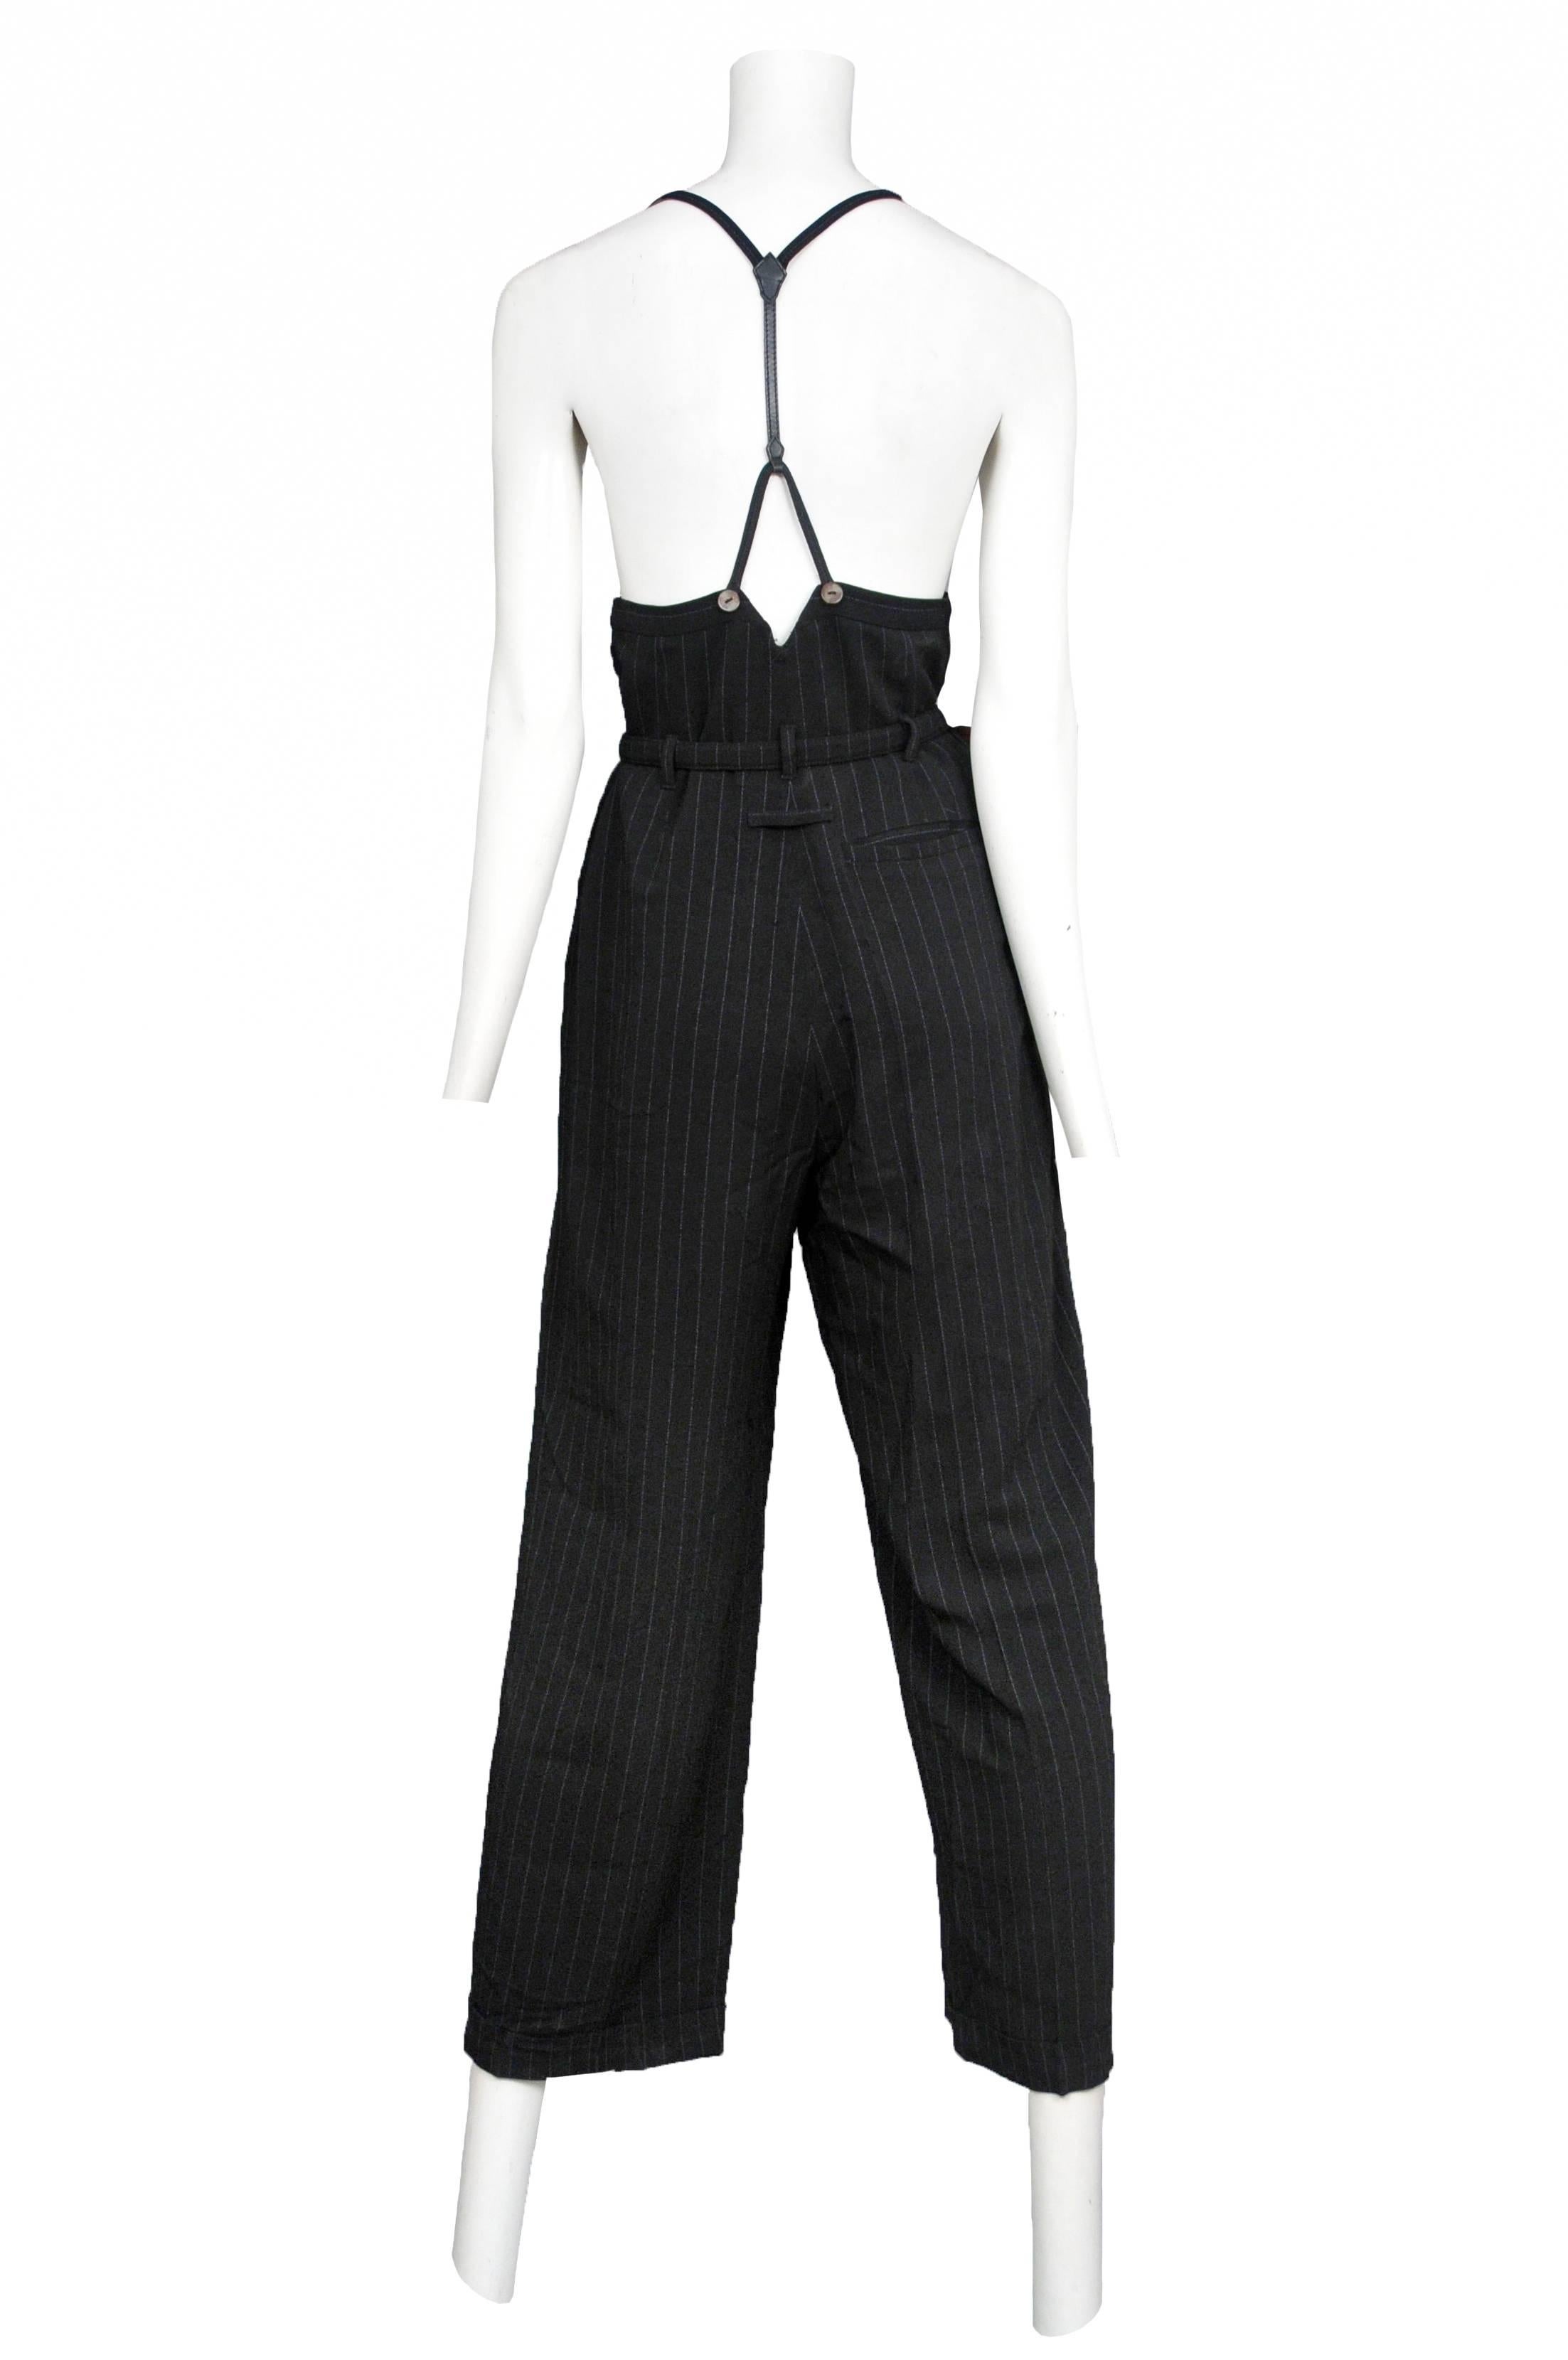 Vintage Jean Paul Gaultier dark grey pinstripe high waisted, belted trousers featuring suspenders that attach at the front and in a racerback fashion in the back. 